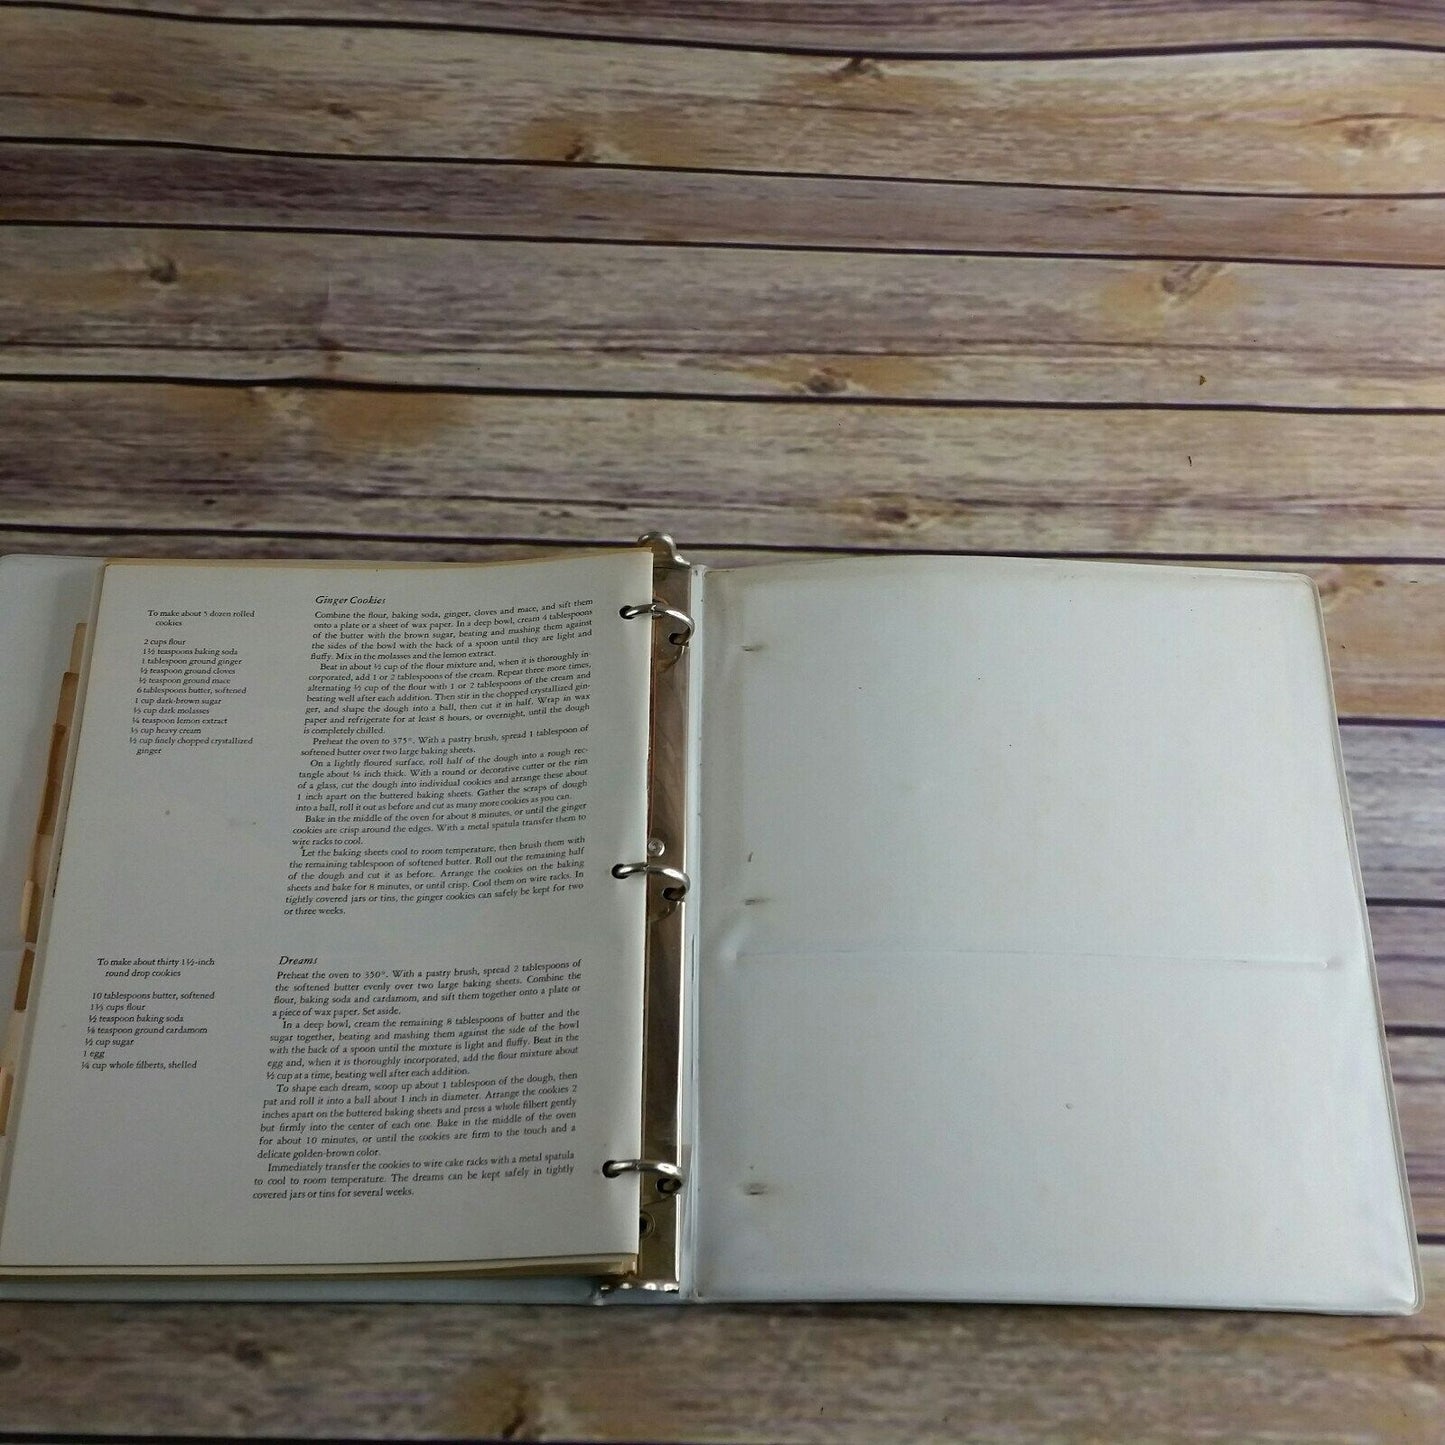 Vintage Cookbook Time Life Books Foods of the World 1969 3 Ring Binder France Italy American Spain Portugal Middle East  Germany Russia